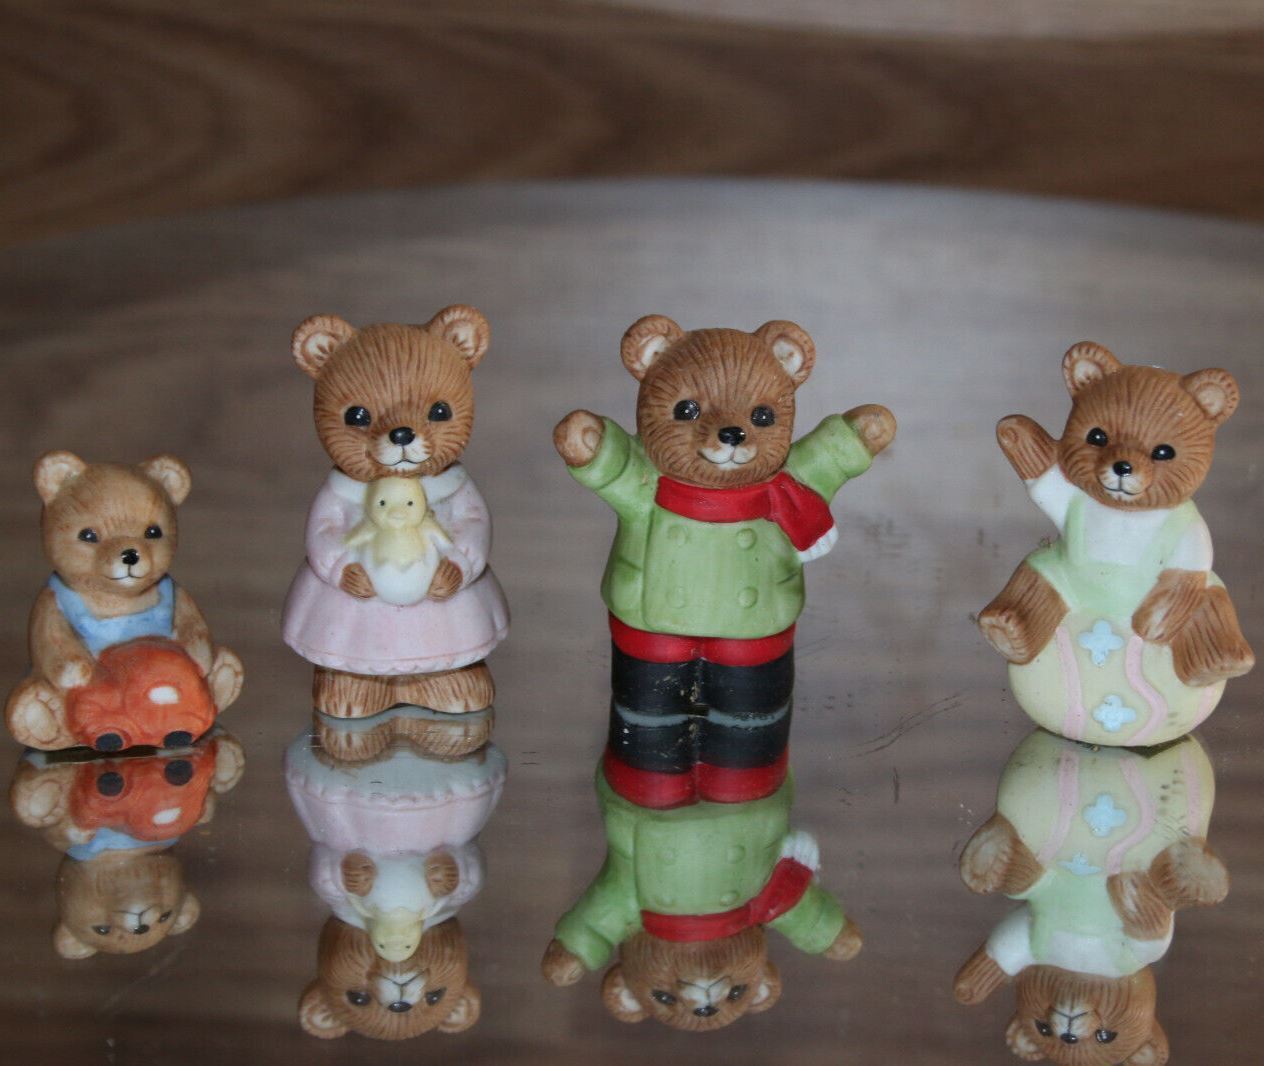 Bear Figurines dad mom two babies (LOT of 4) #1430 1470 5101 HOMCO VTG